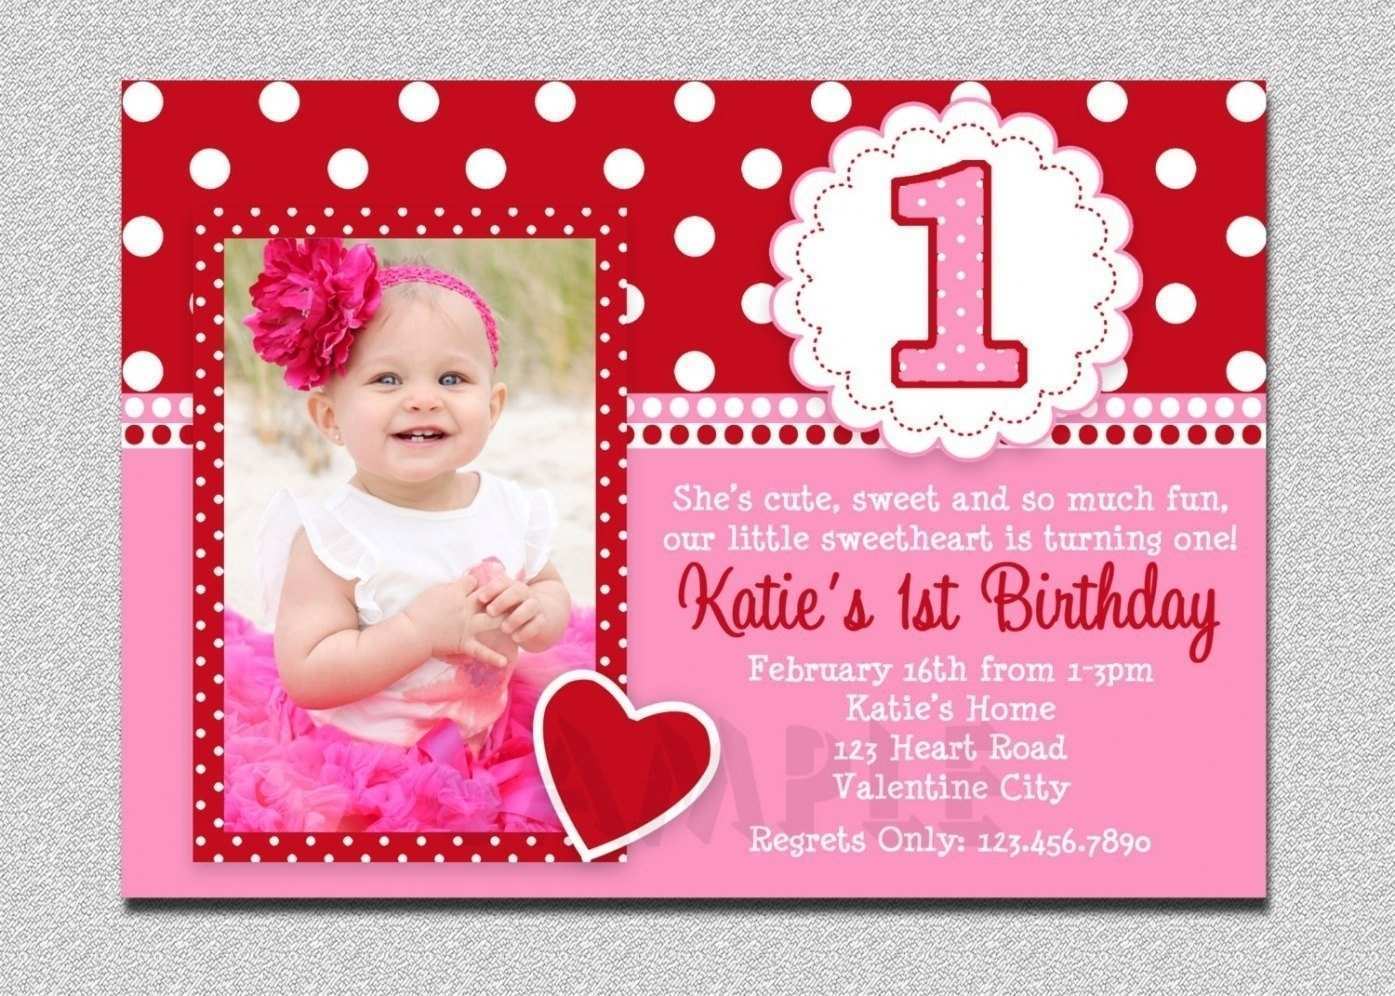 28 Blank Invitation Card Template For 1St Birthday by Invitation Card Template For 1St Birthday